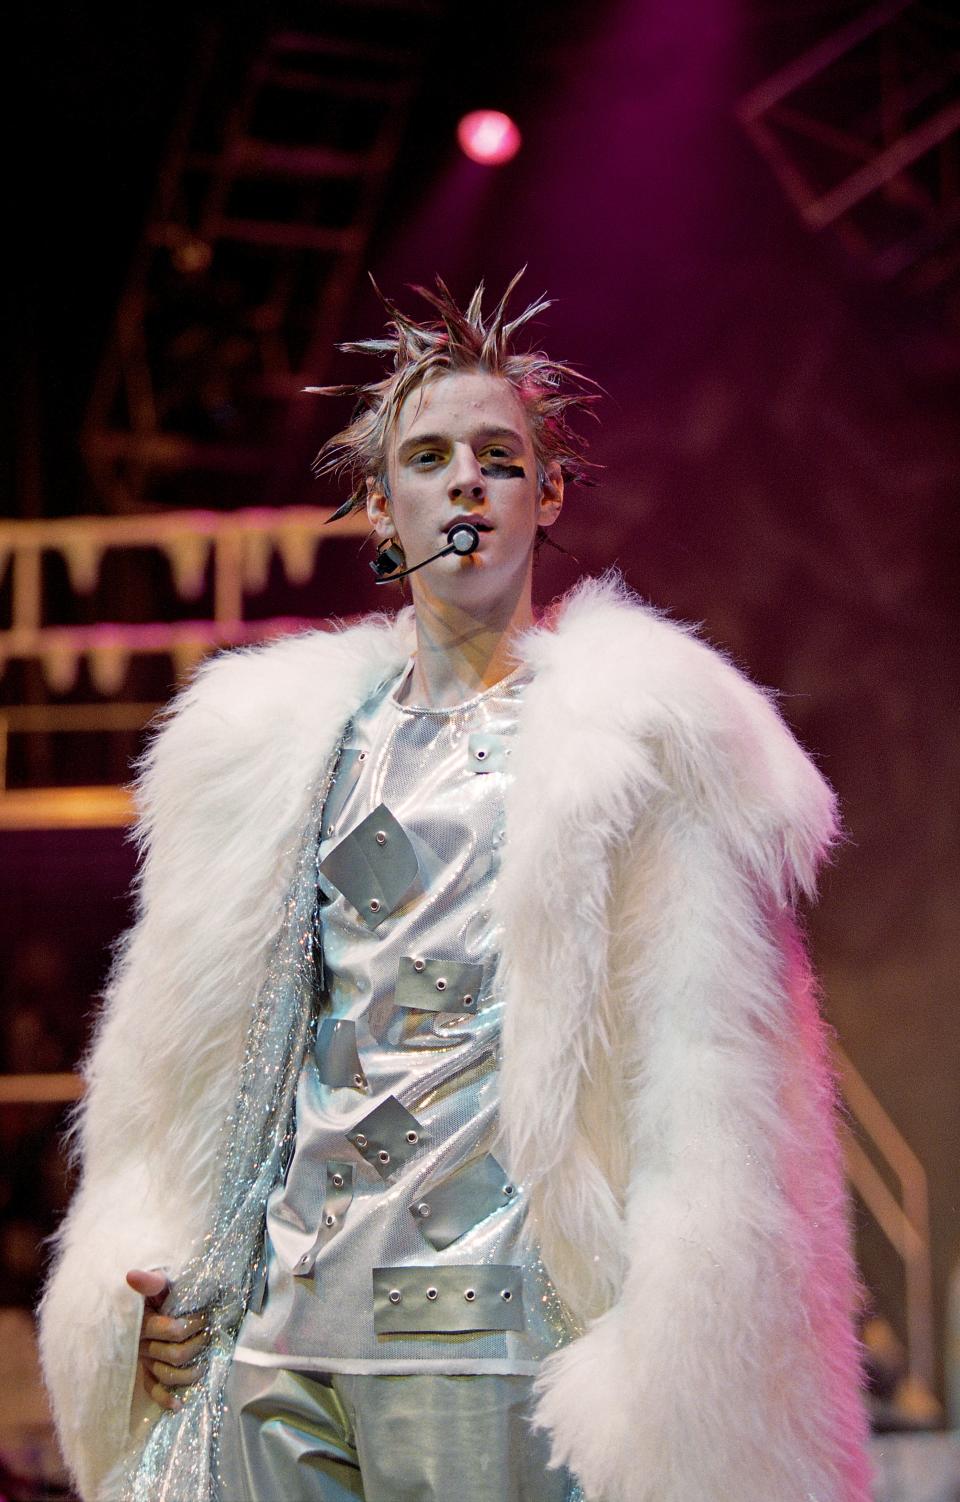 Aaron Carter performs in concert at the HP Pavilion on February 22, 2002 in California.